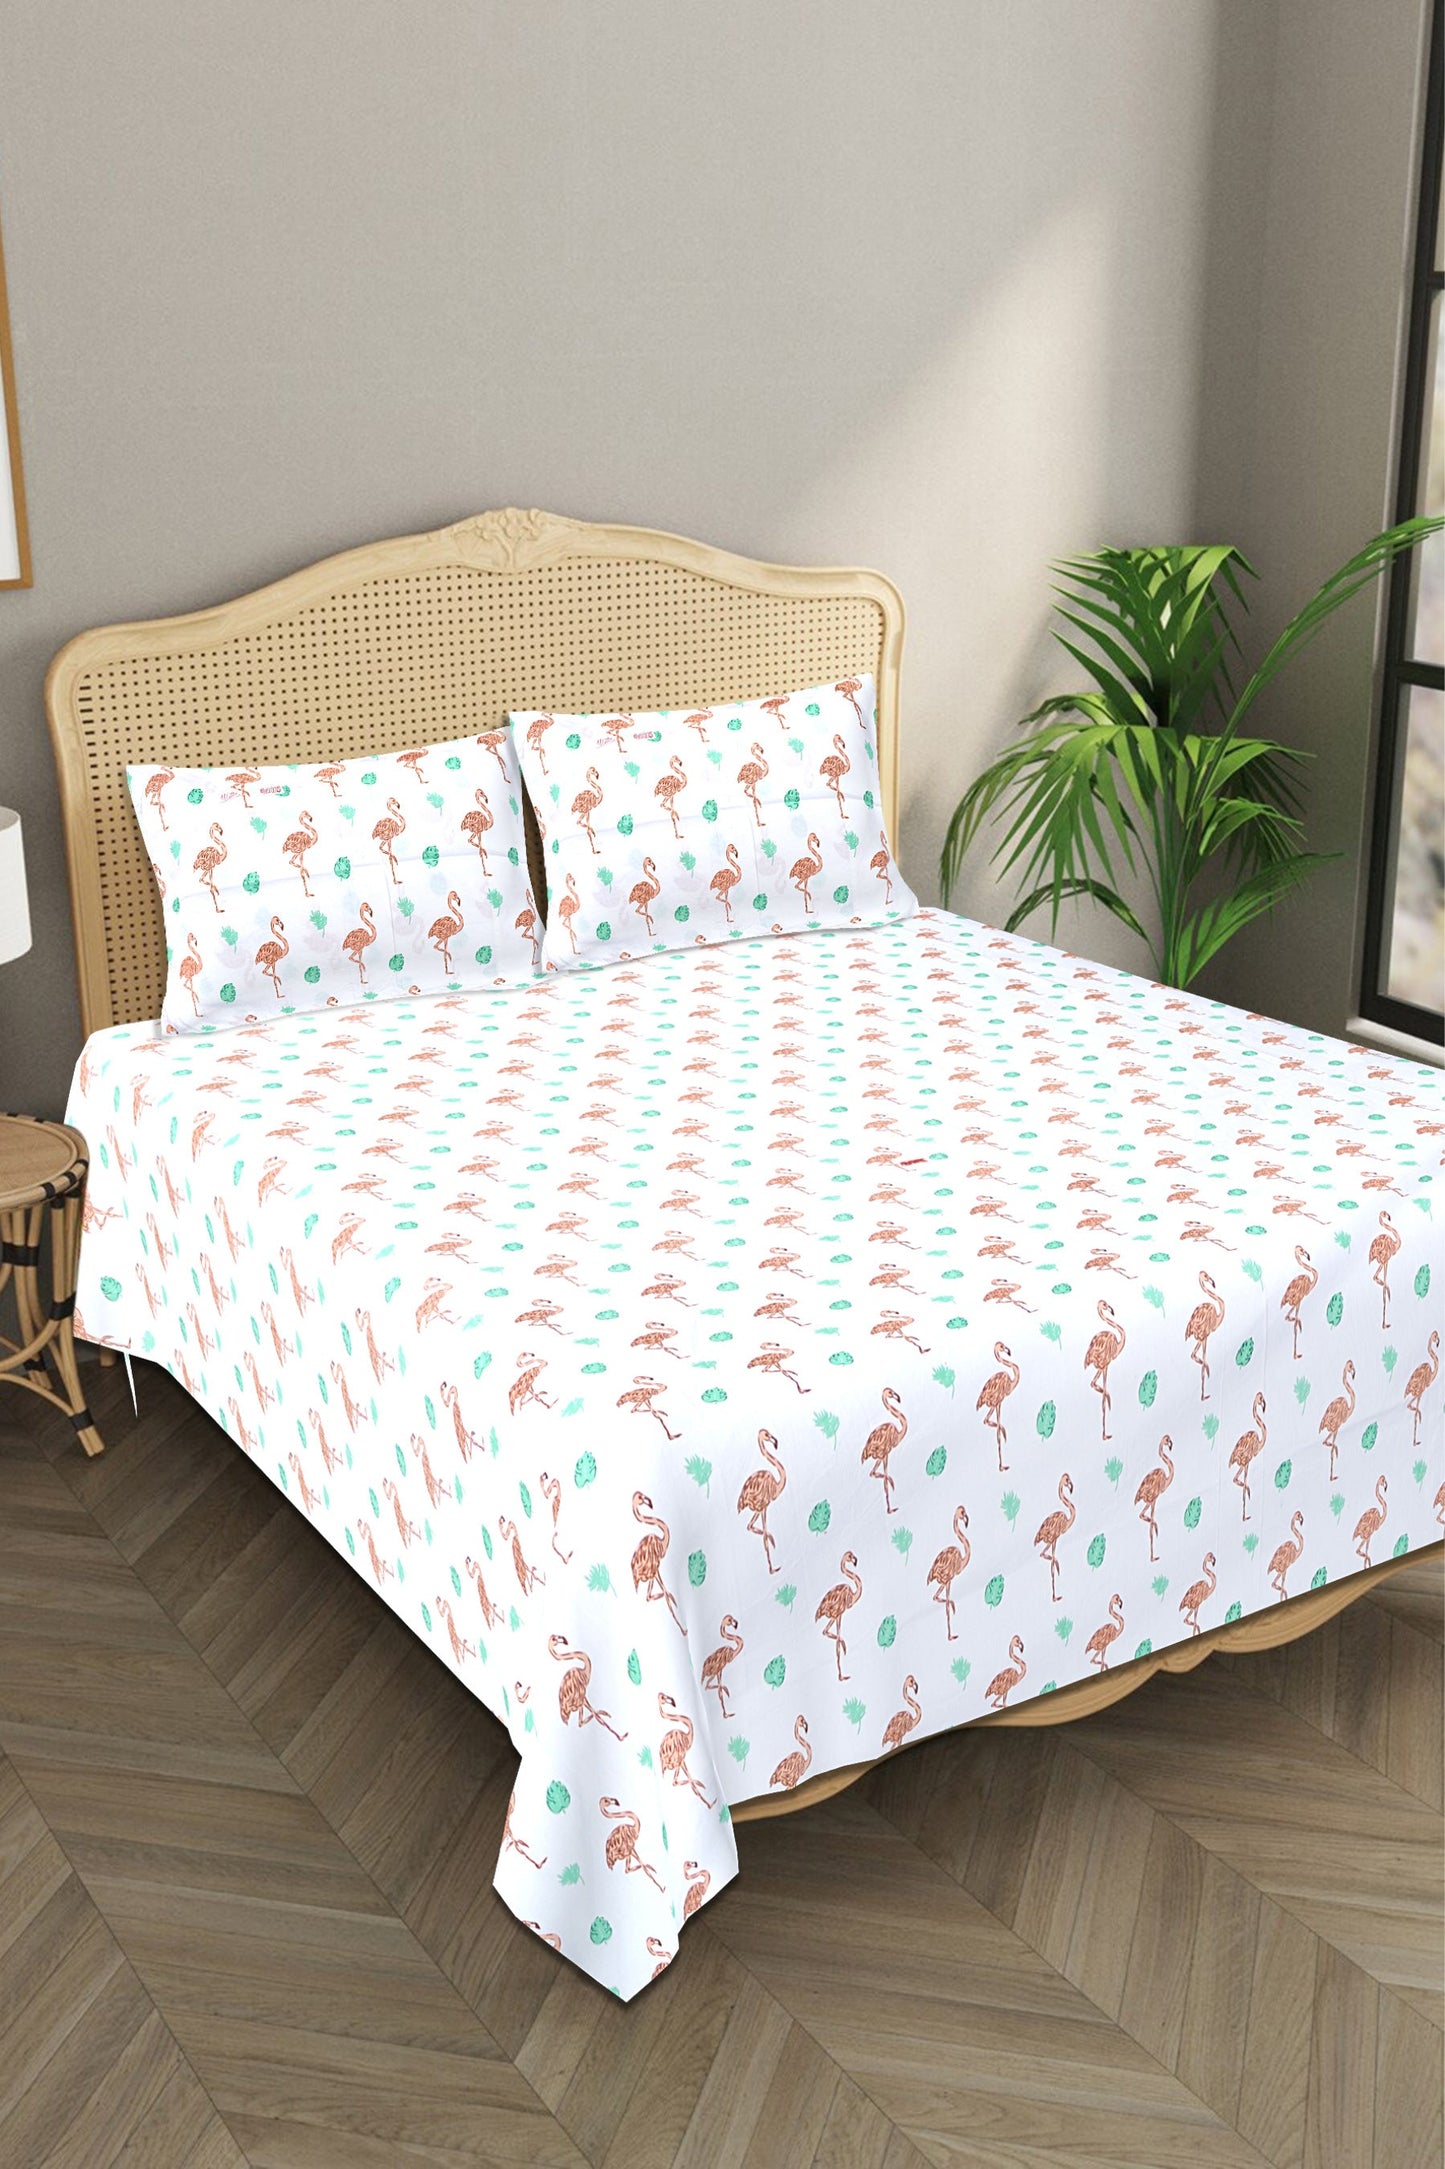 Kids Cotton Bedroom Linens - Double Sheet with 2 Pillow Covers in Flamingo And The Leaves Print - King Size Bed